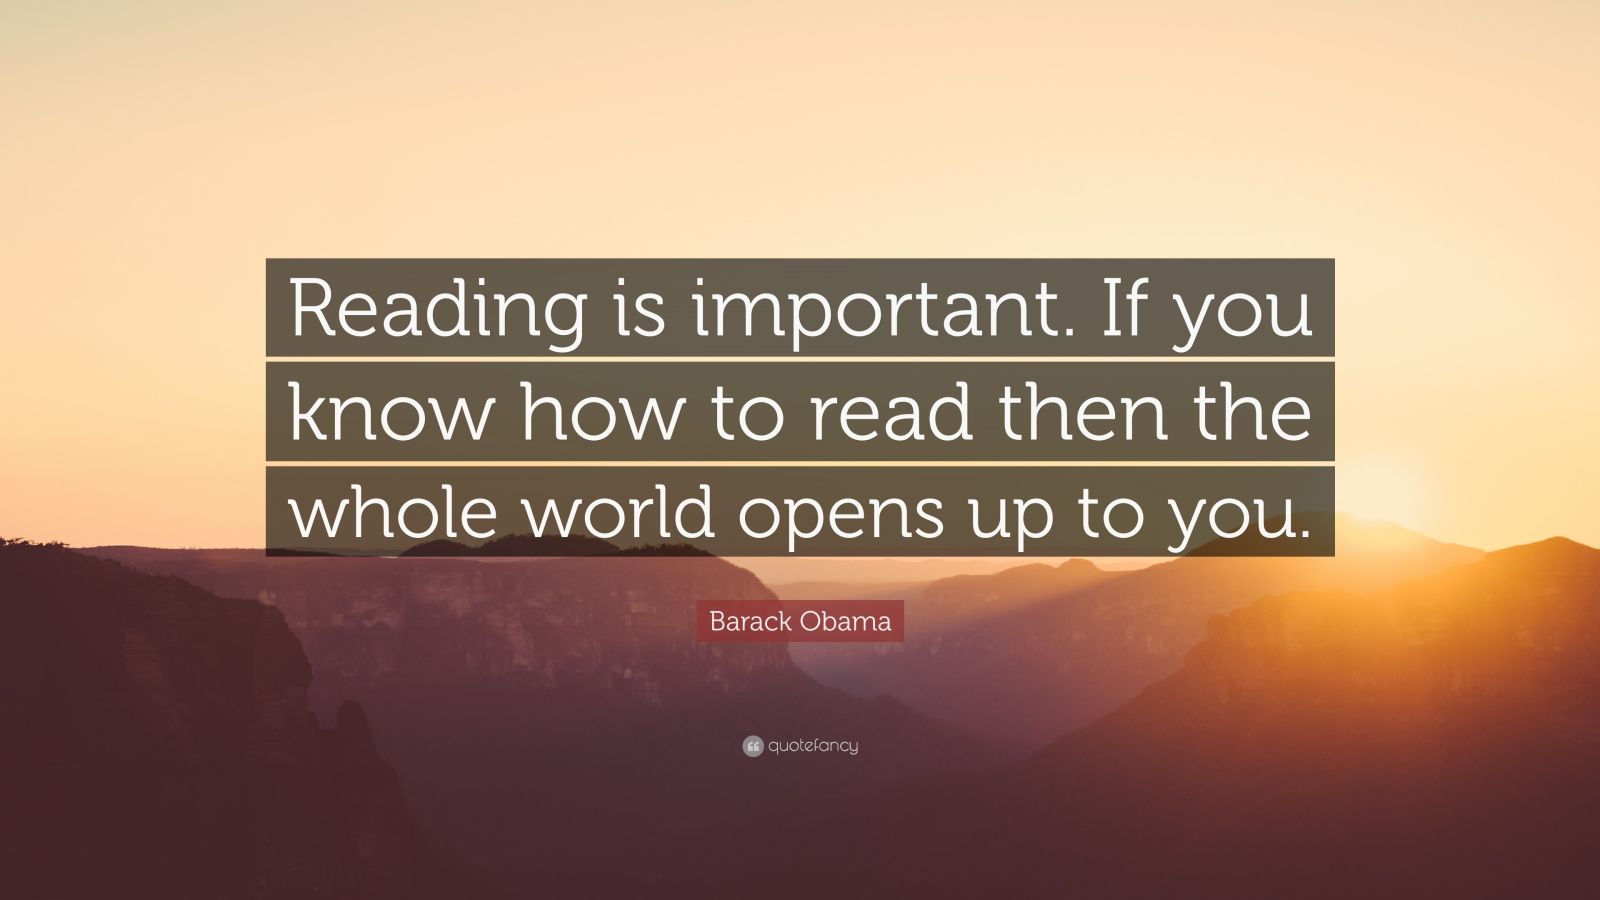 Barack Obama Quote: “Reading is important. If you know how to read then